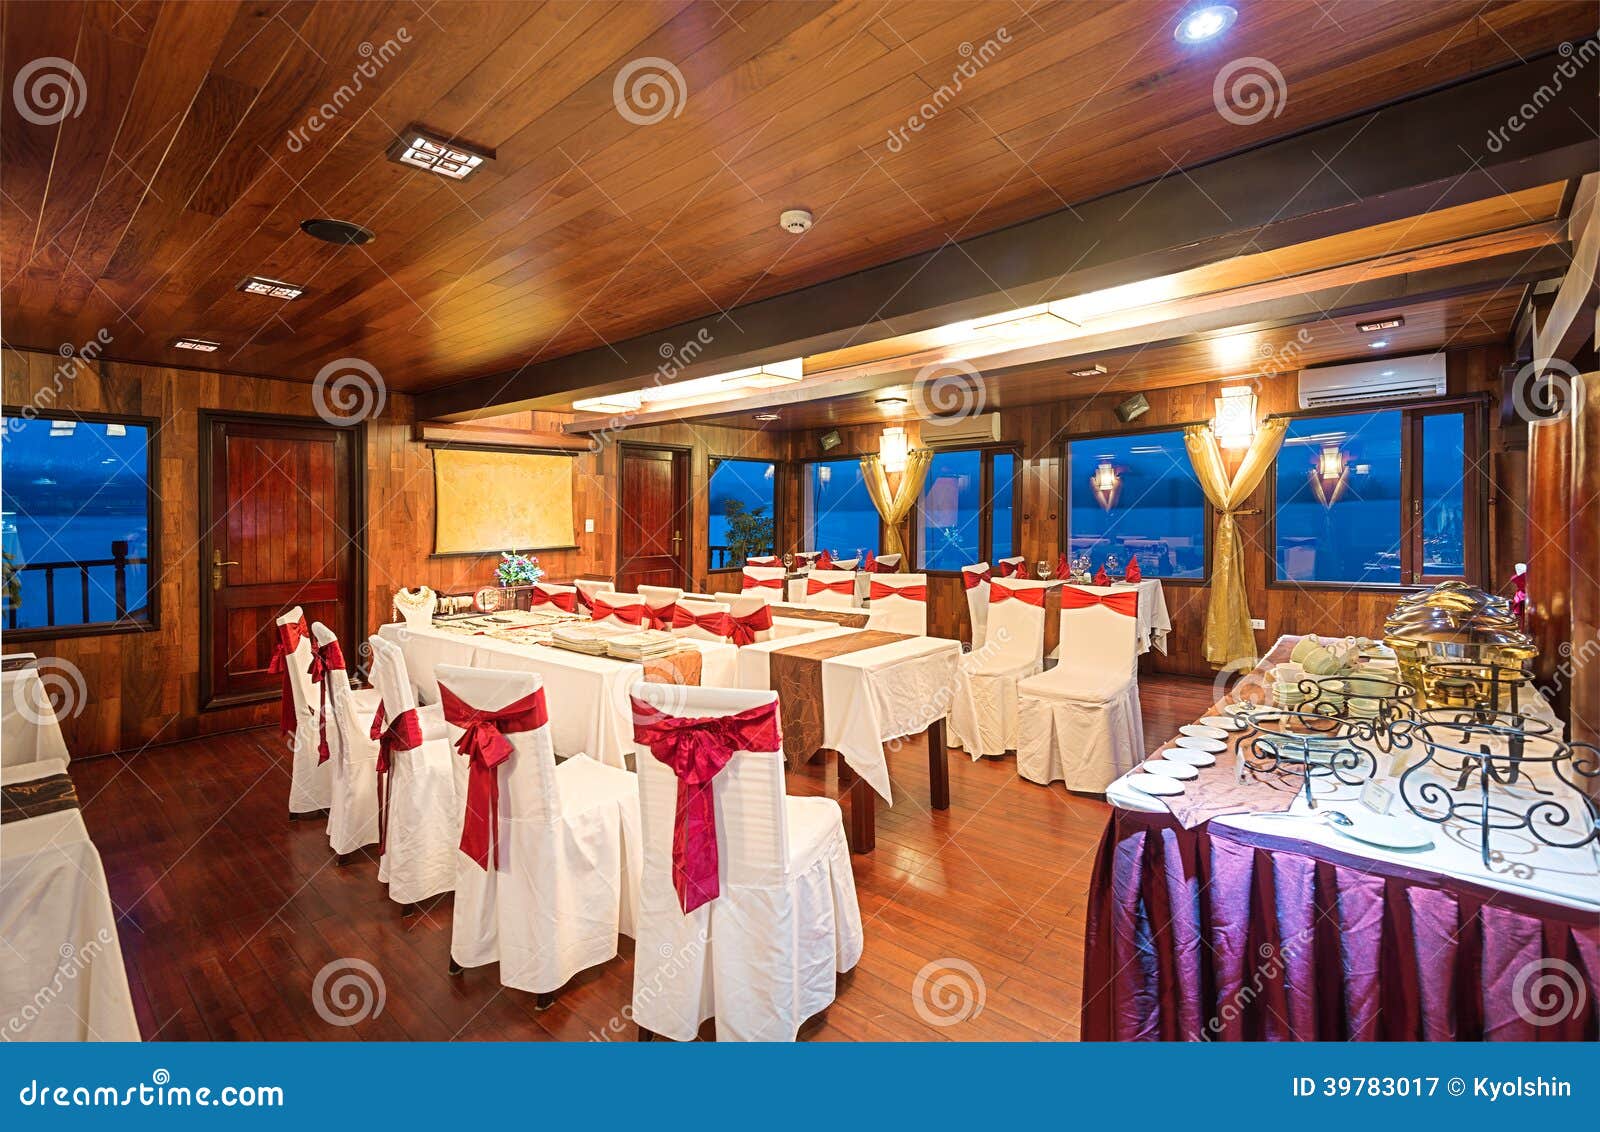 Beautiful Interior Design in Dining Room of Ship. Stock Image - Image ...